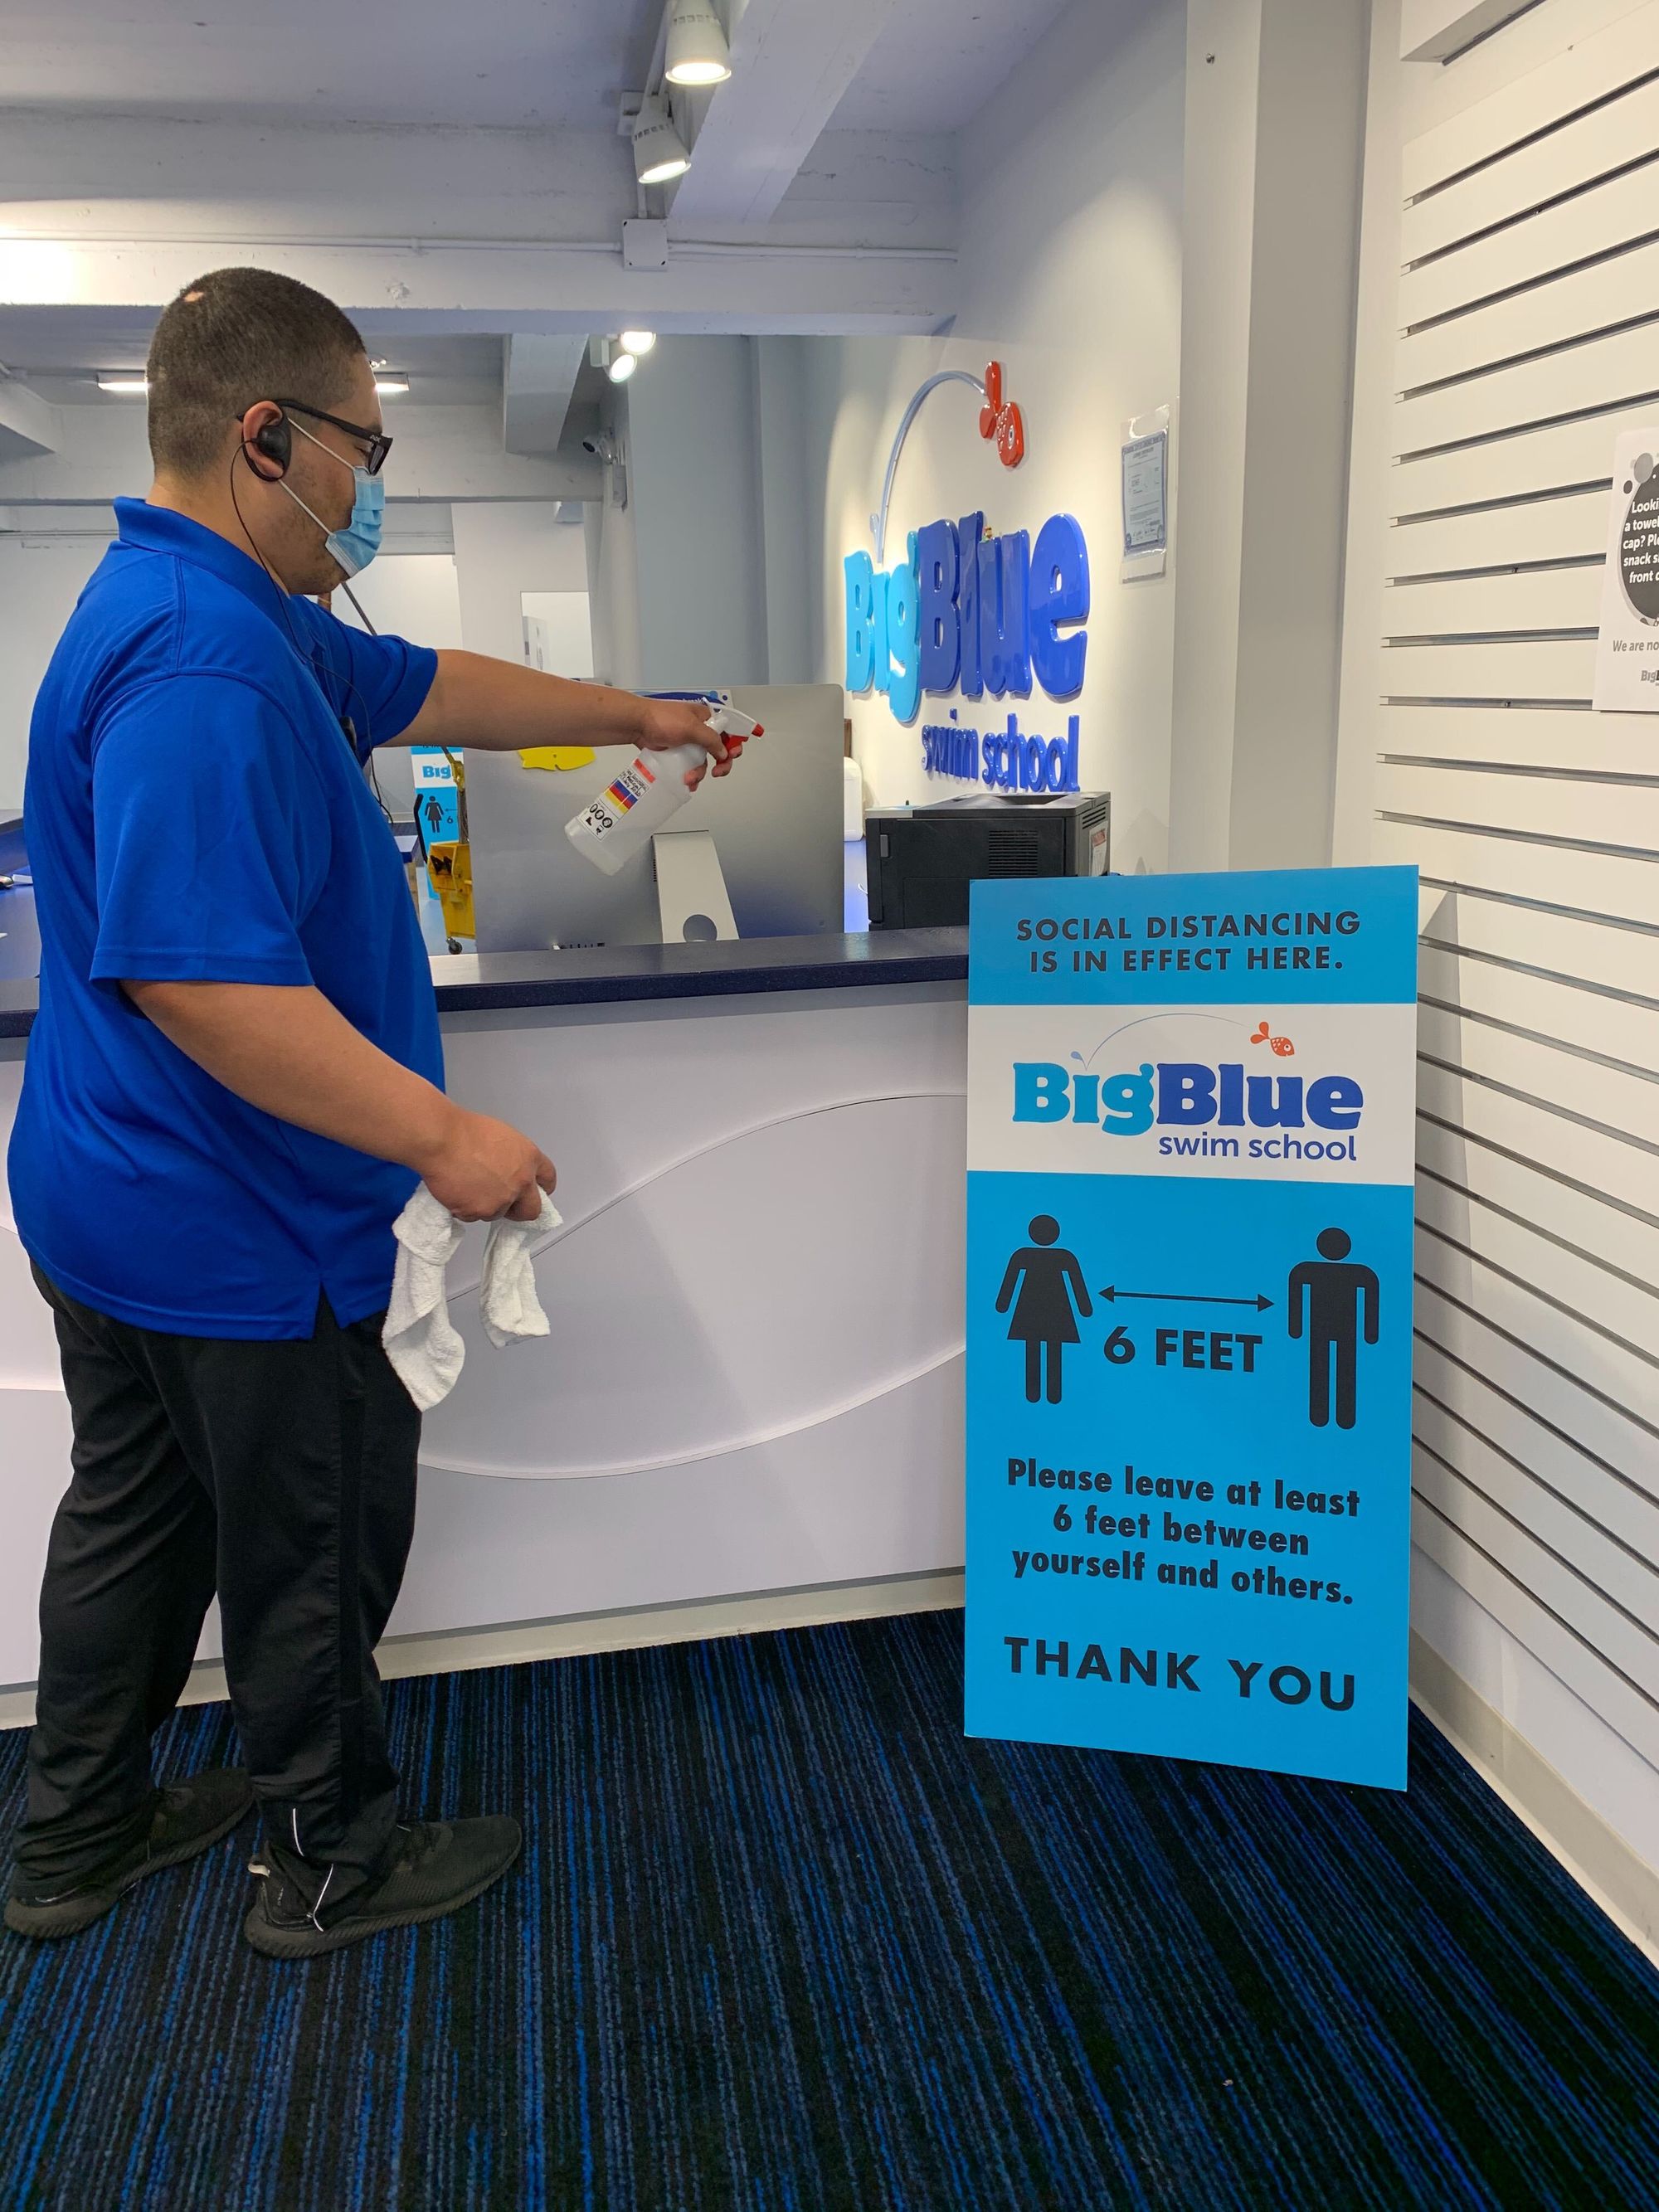 Big Blue staff members disinfect all high touch surfaces every 30 minutes